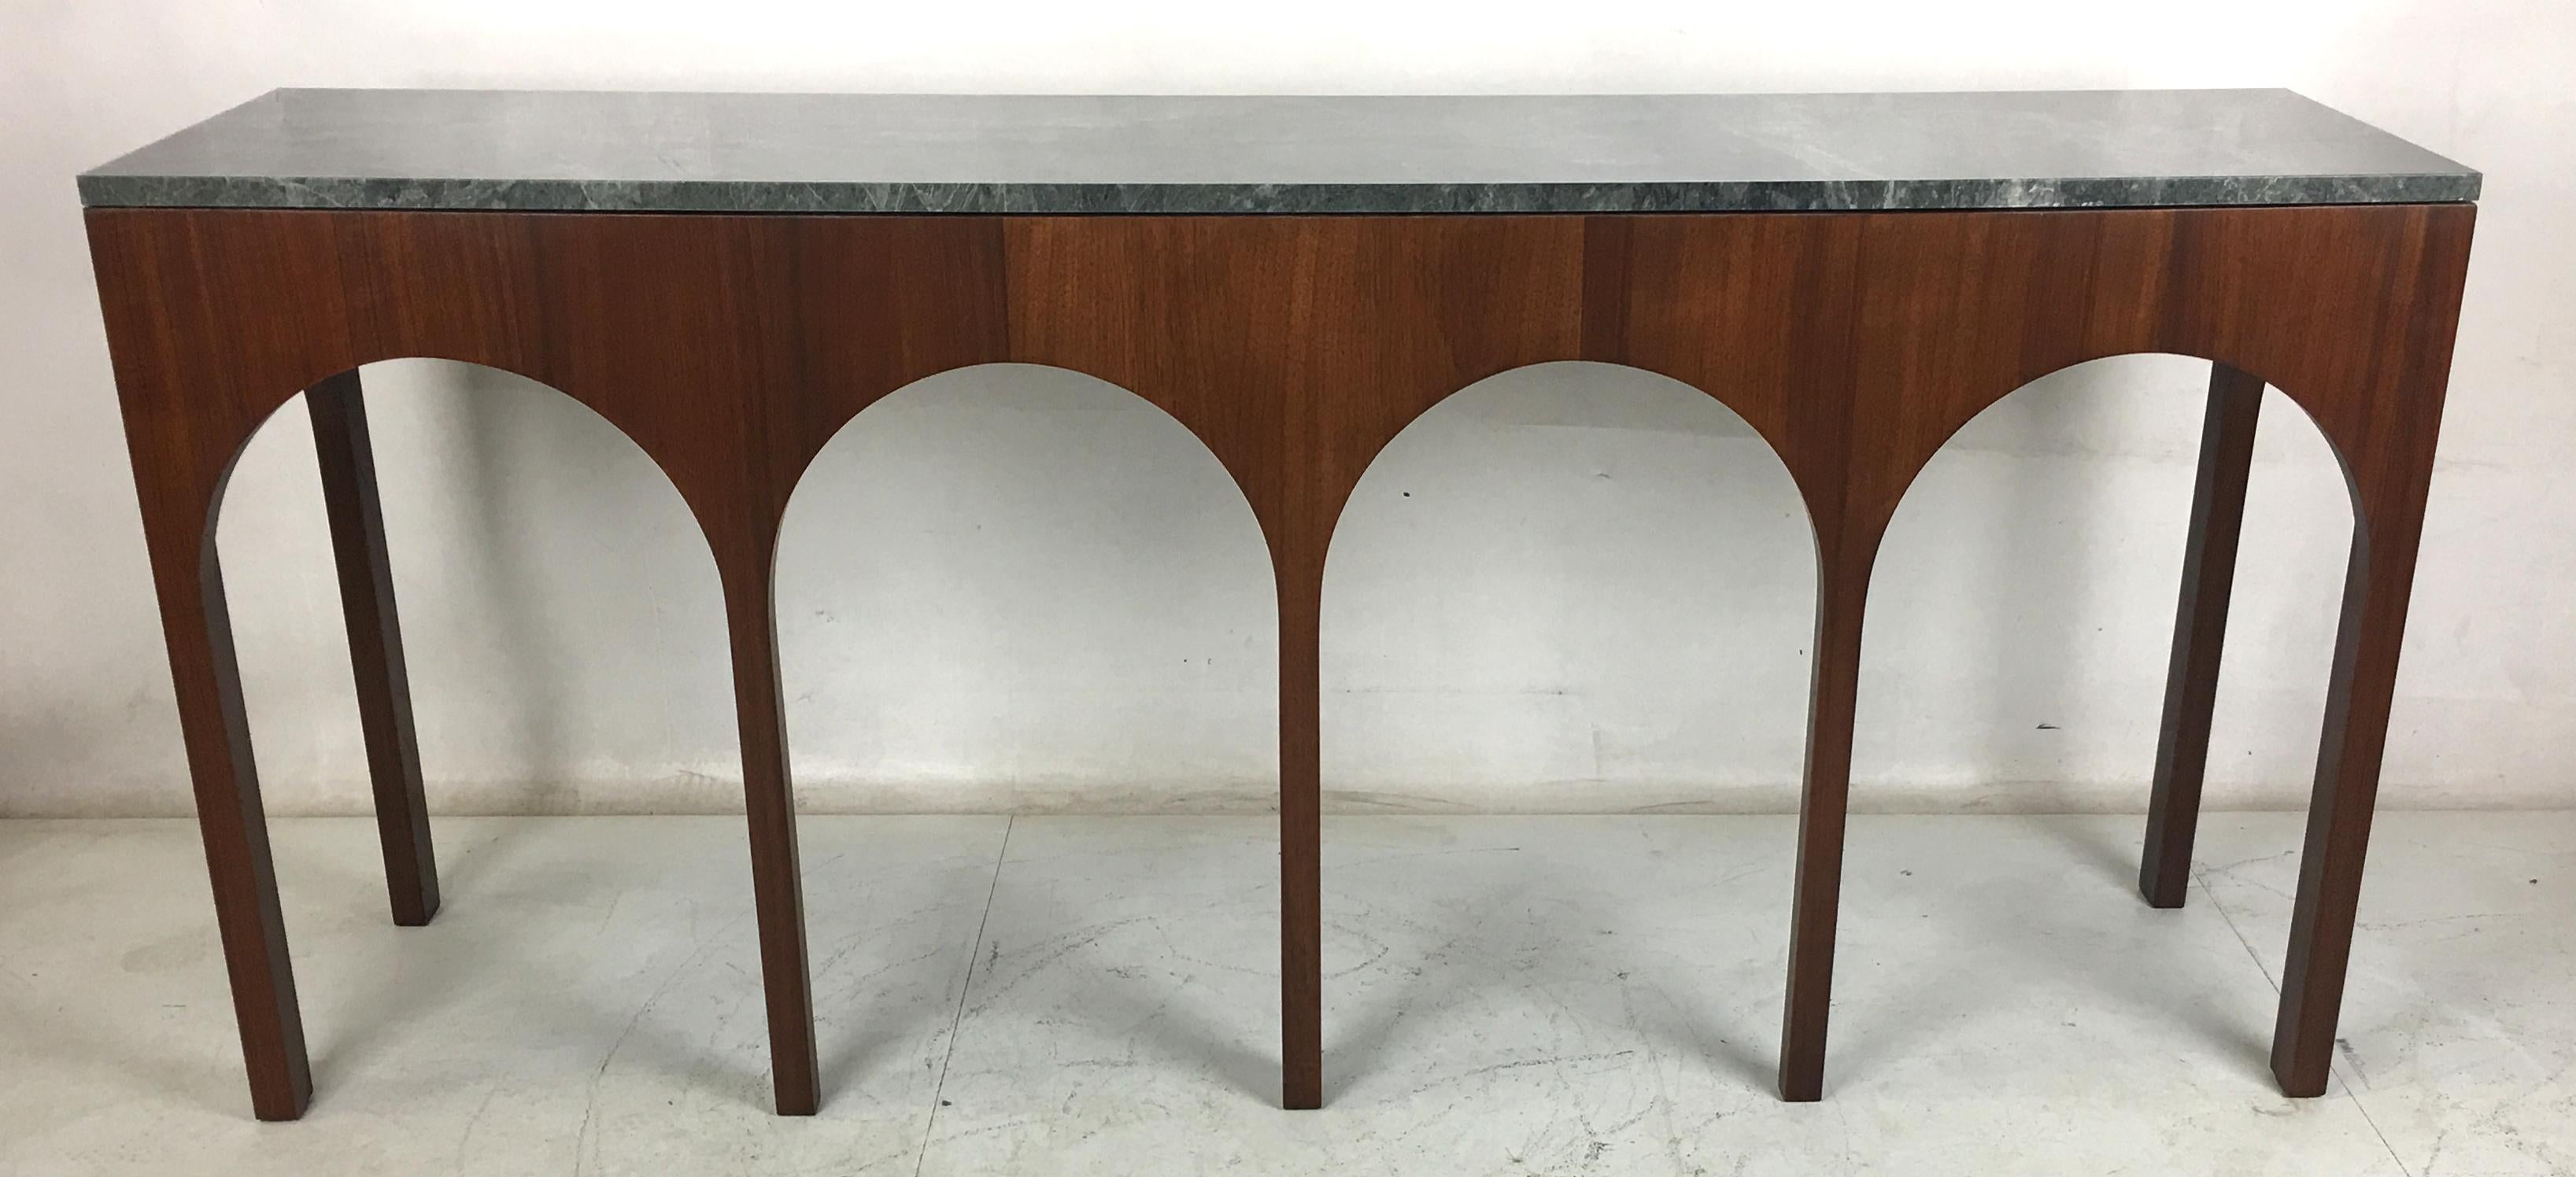 American Rare Coliseum Console with Marble Top by T.H. Robsjohn-Gibbings